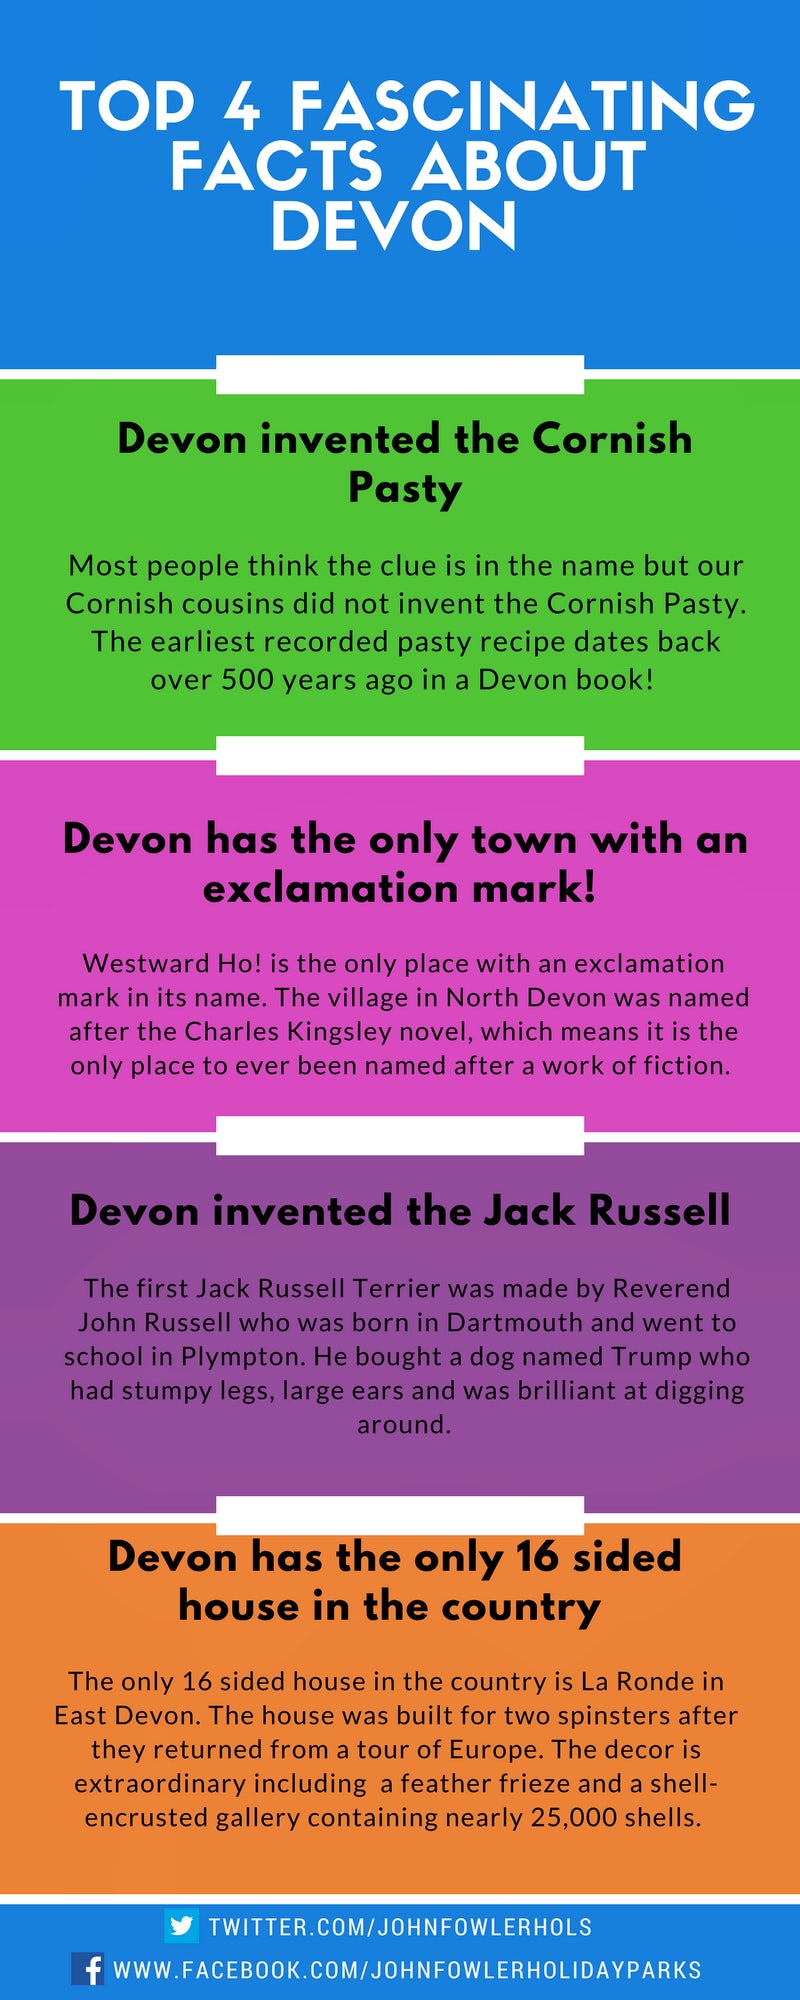 TOP 4 FASCINATING FACTS ABOUT DEVON